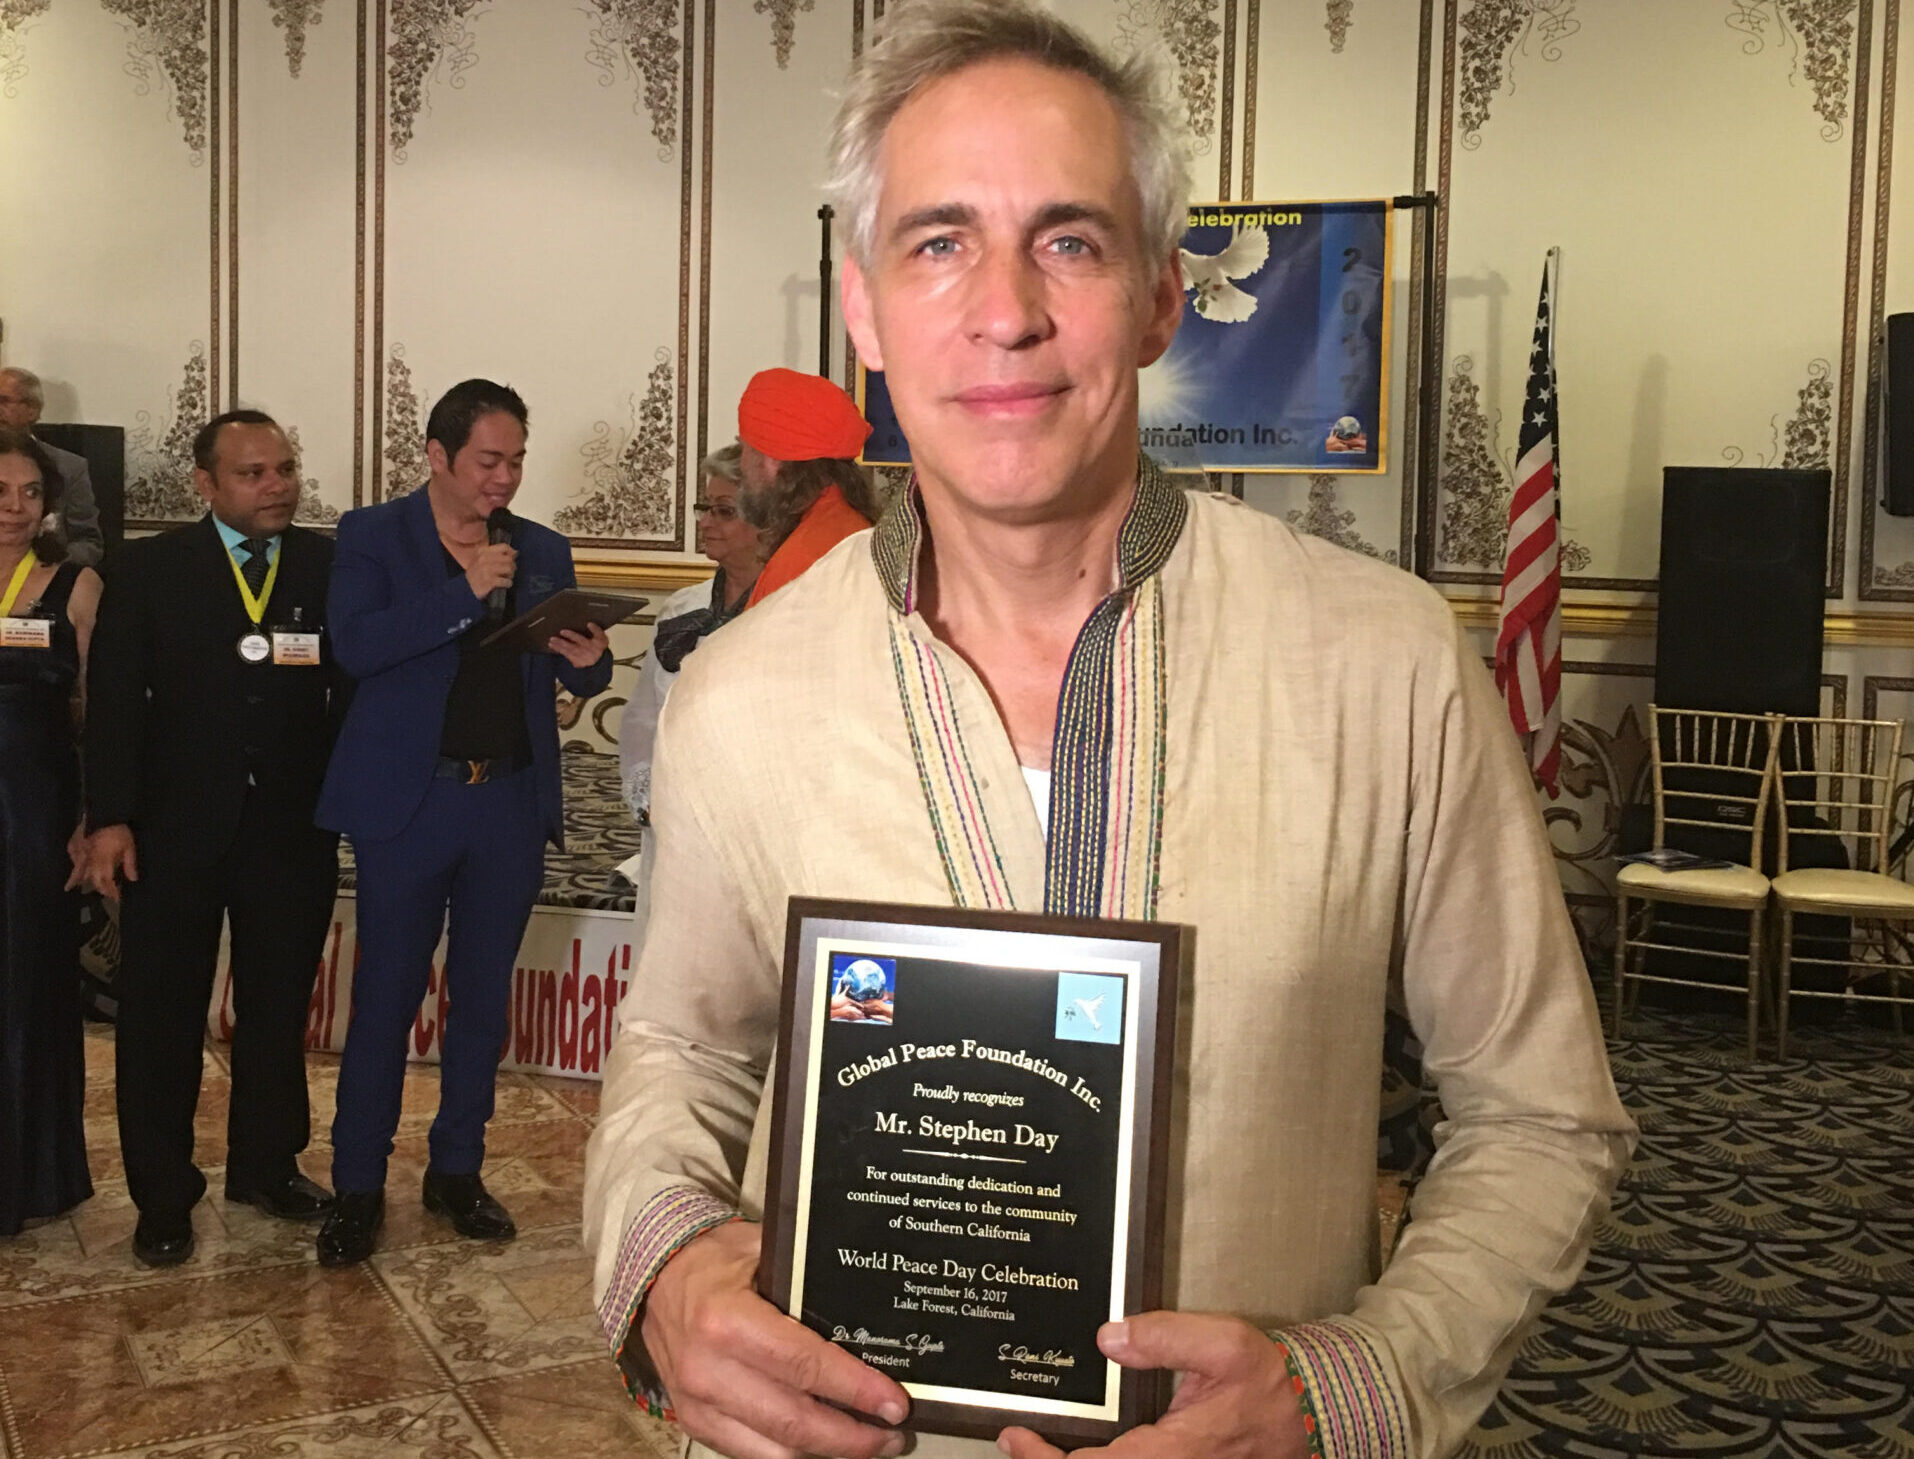 World Peace Award from the Global Peace Foundation